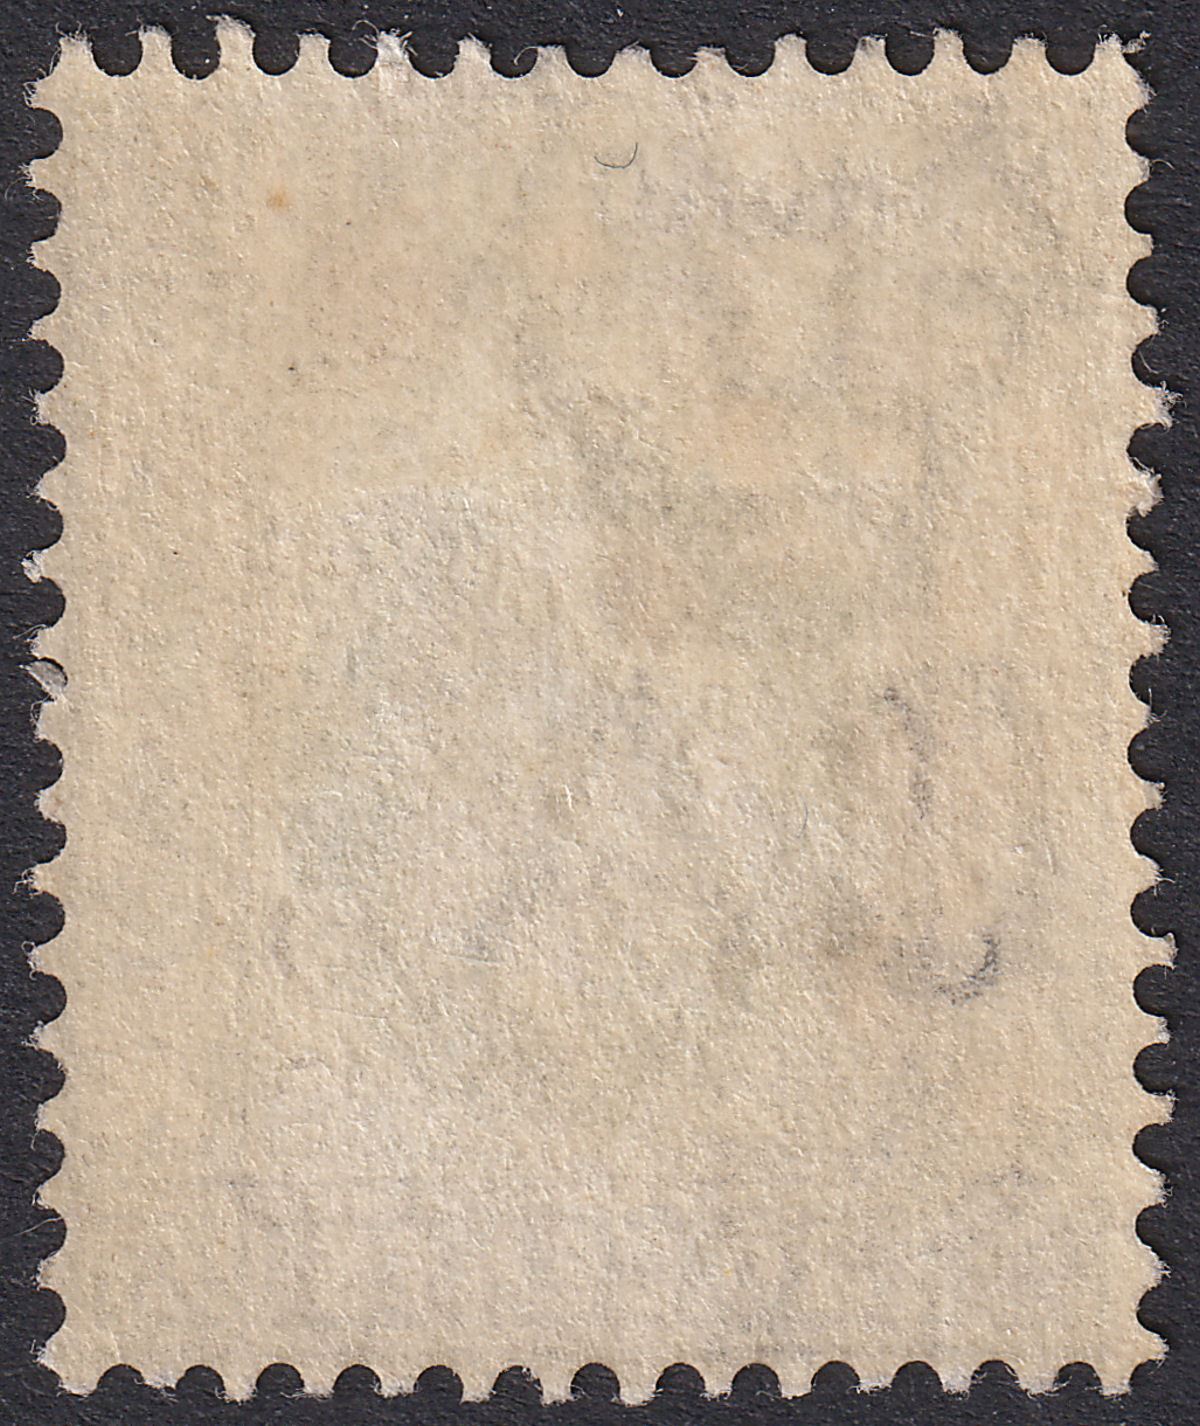 Hong Kong 1903 KEVII 30c Used with HANKOW code A Postmark SG Z483 cat £75